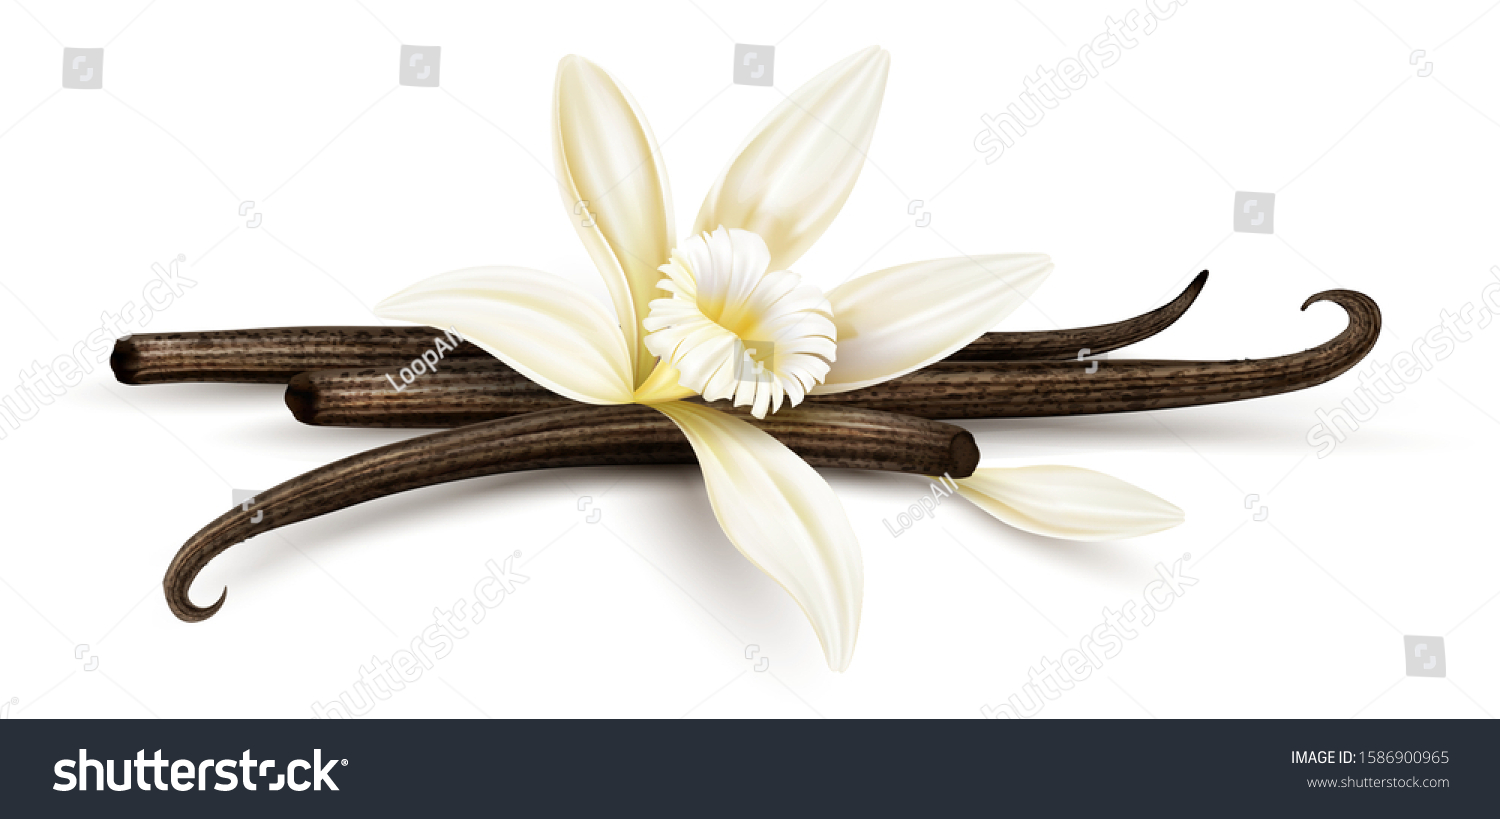 Vanilla flower with dried vanilla sticks and petal. Realistic food cooking condiment. Aromatic seasoning ingredient for cookery and sweet baking, Isolated white background. Eps10 vector illustration. #1586900965